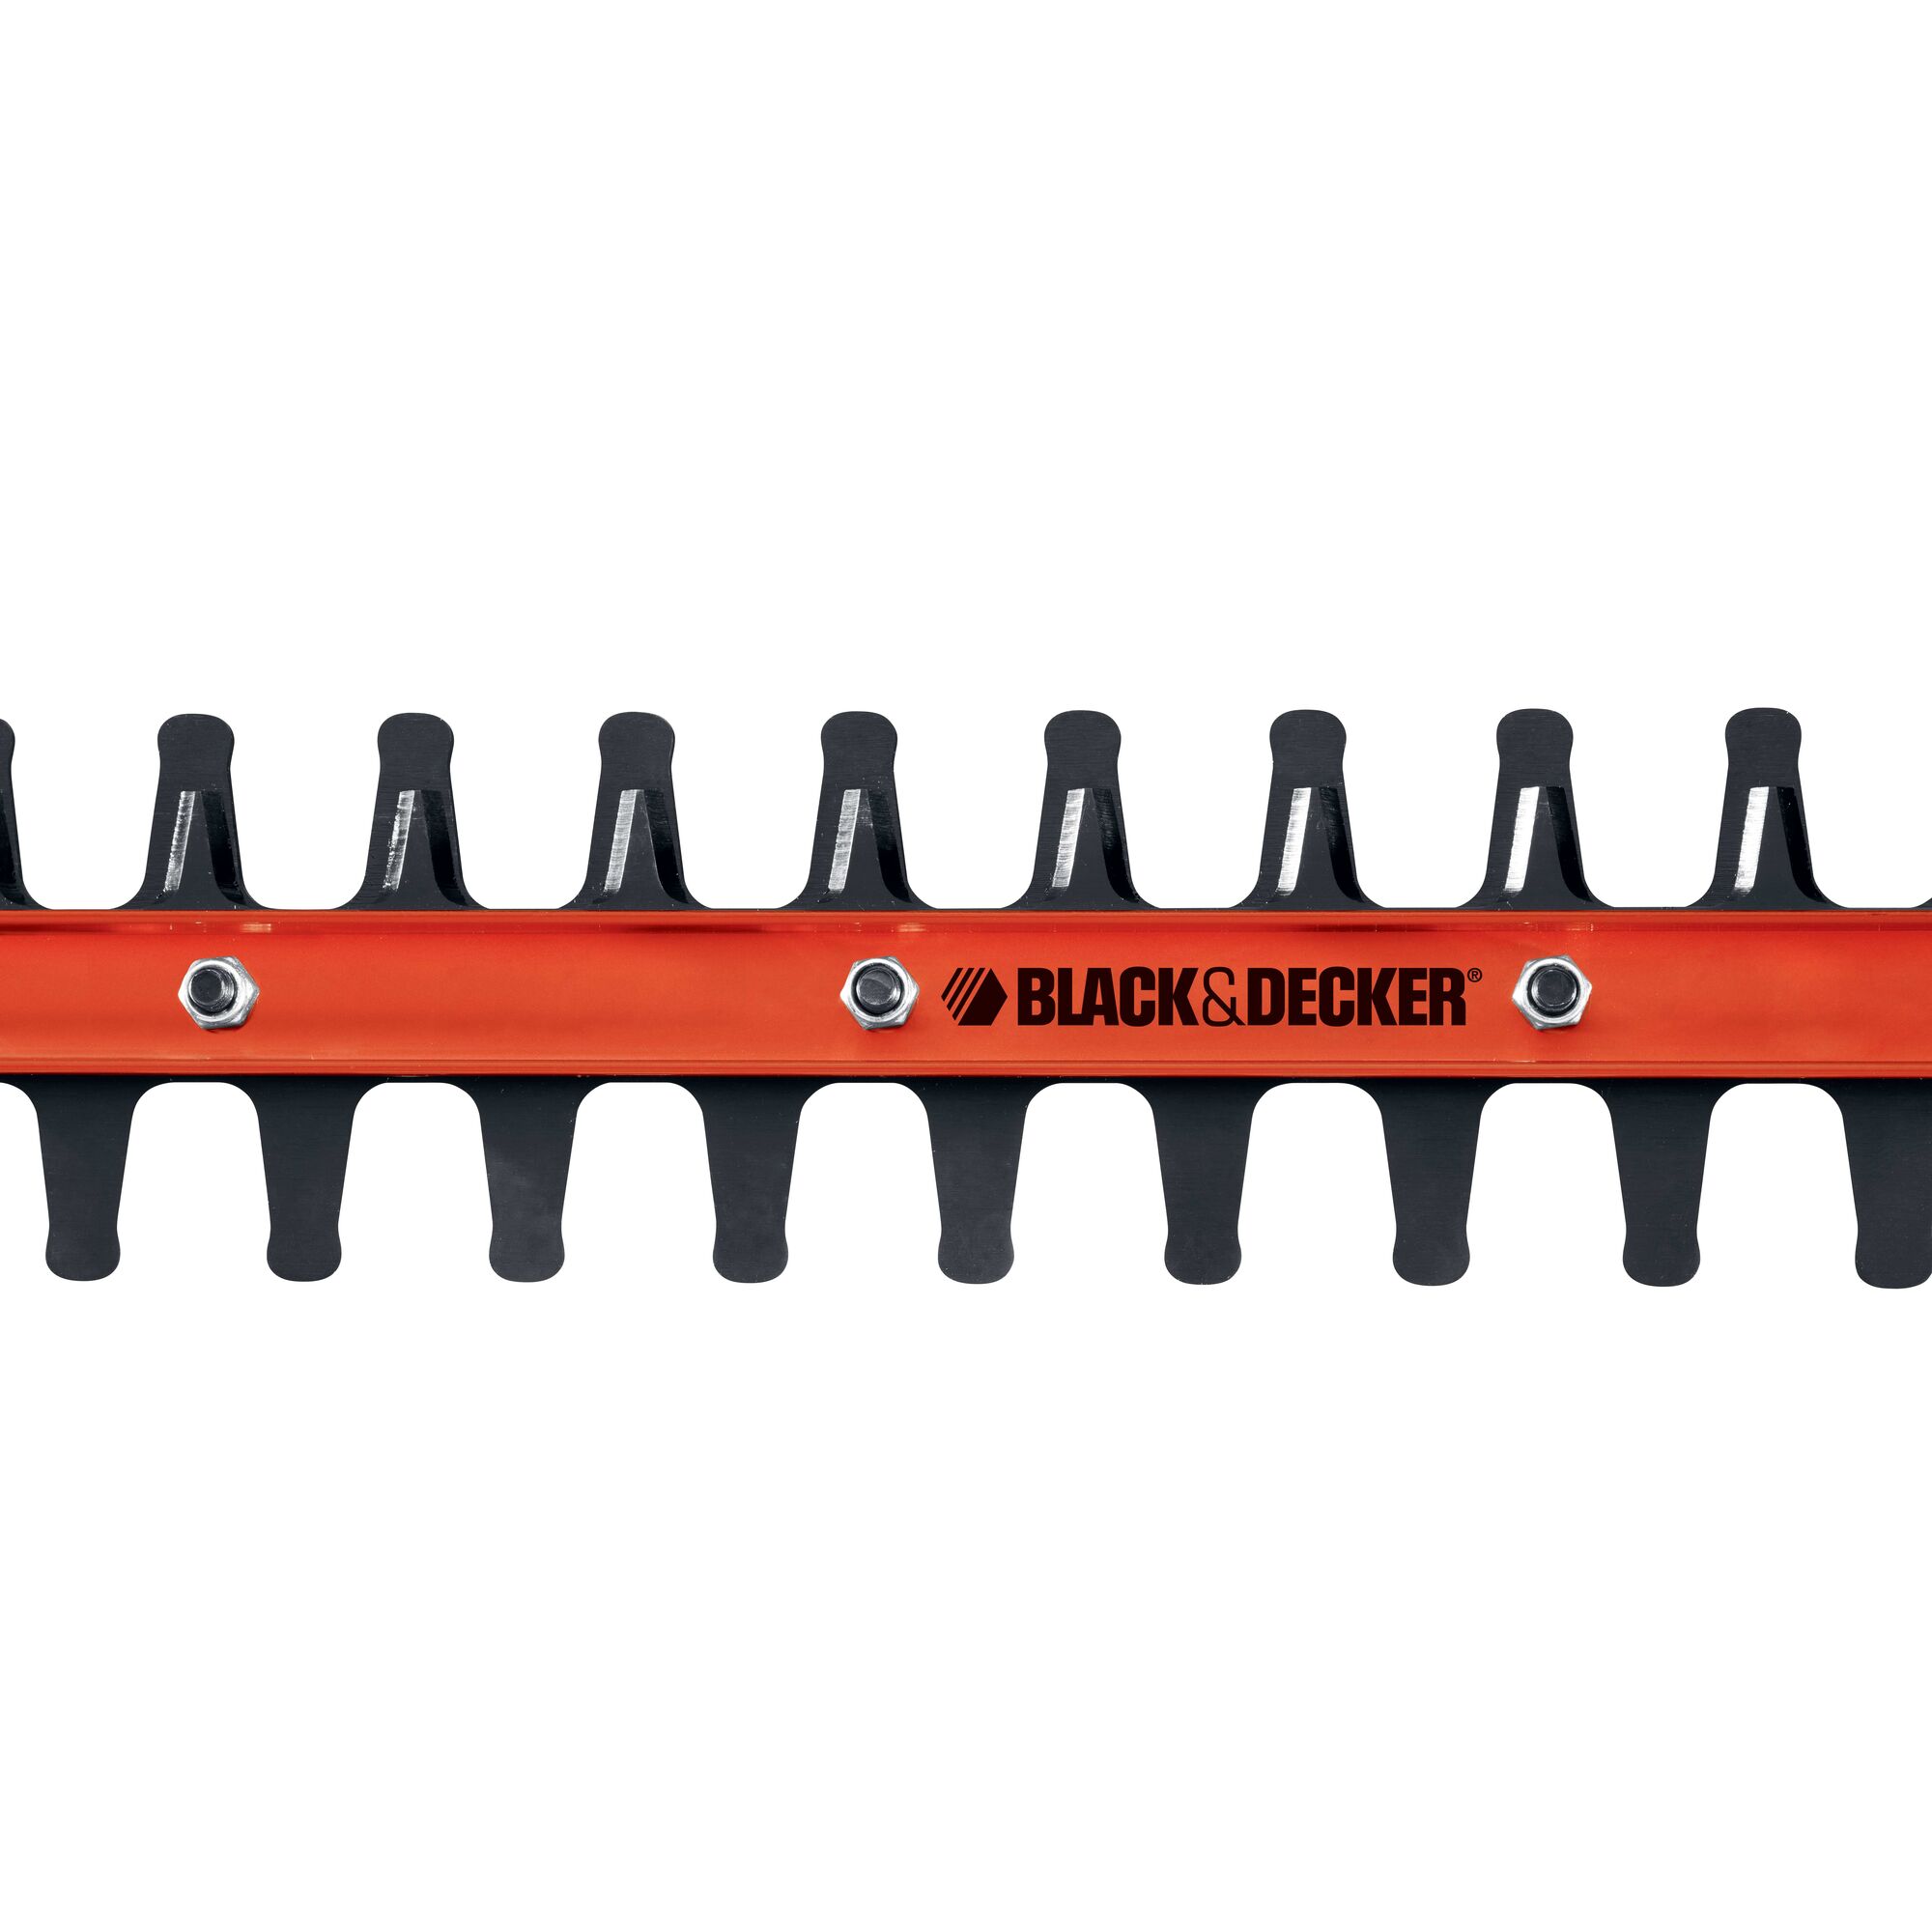 Rotating handle feature of 24 inch hedge trimmer with rotating handle.